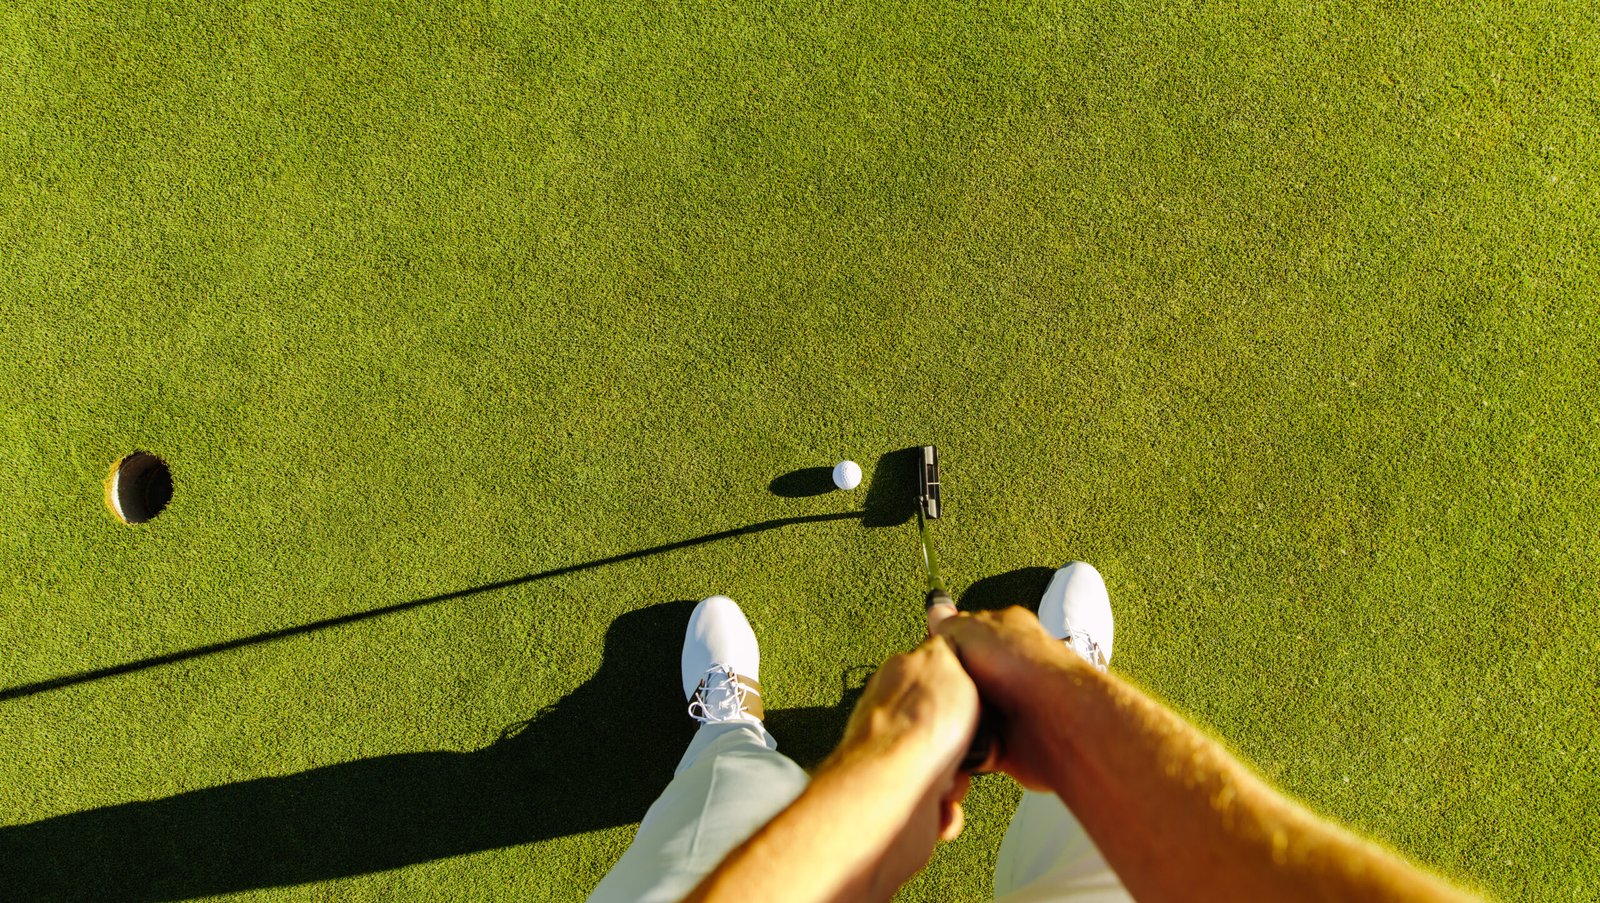 HOW TO : PLAY GOLF LIKE A PRO